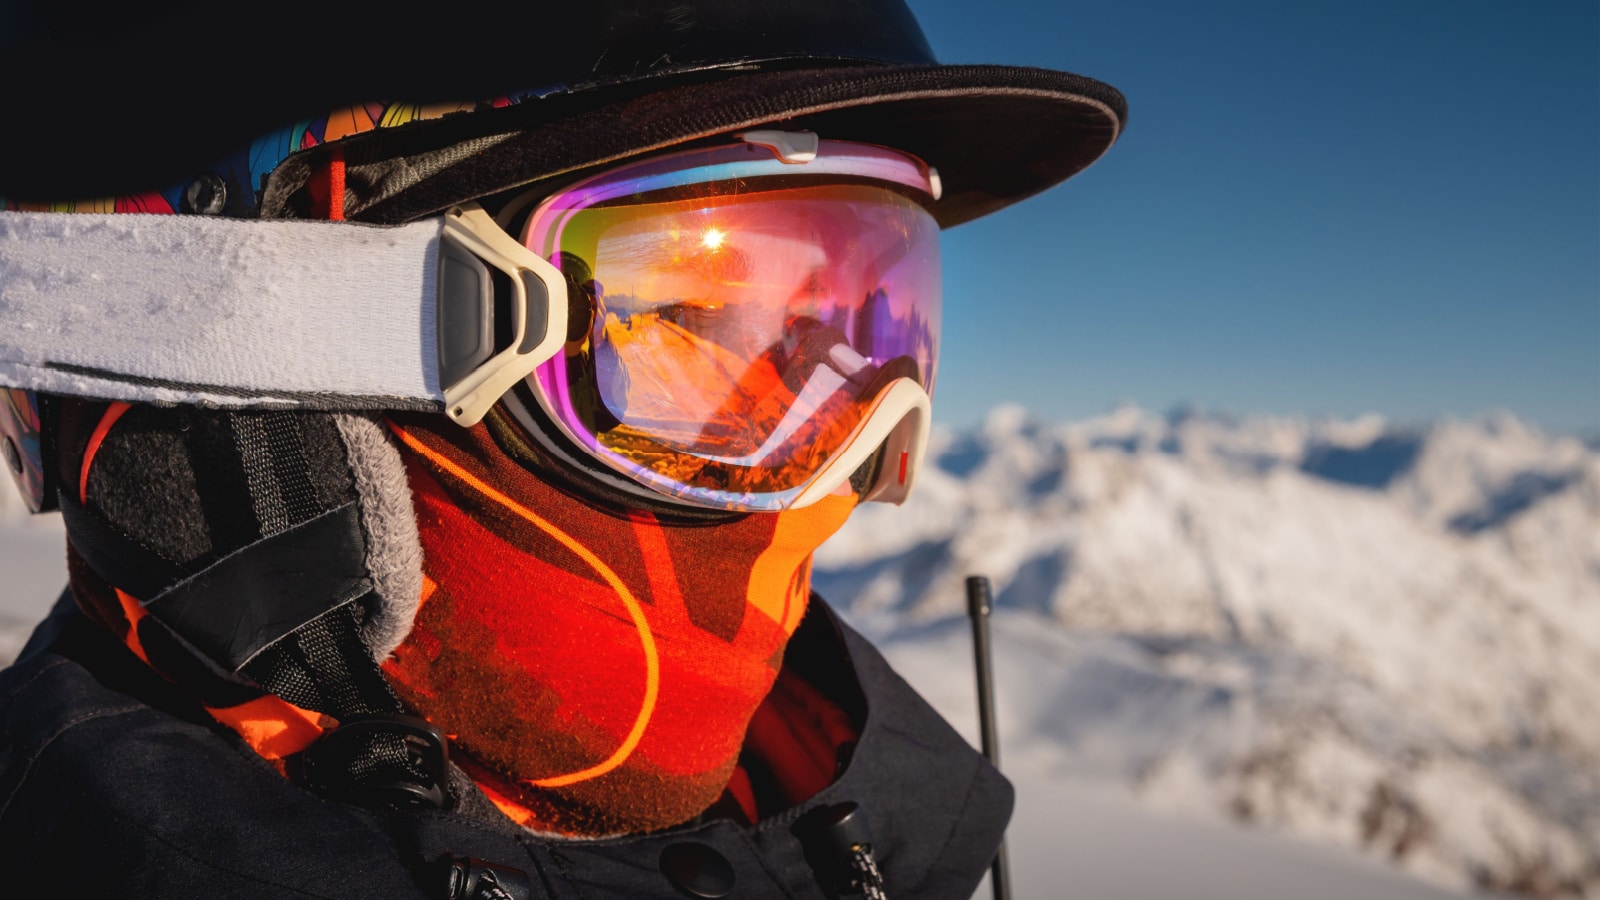 Profile of a female skier in ski goggles in the mountains. A woman in a sports ski jacket and snowboard sunglasses looks away. Sportswear and fashion for winter sports, ski resort